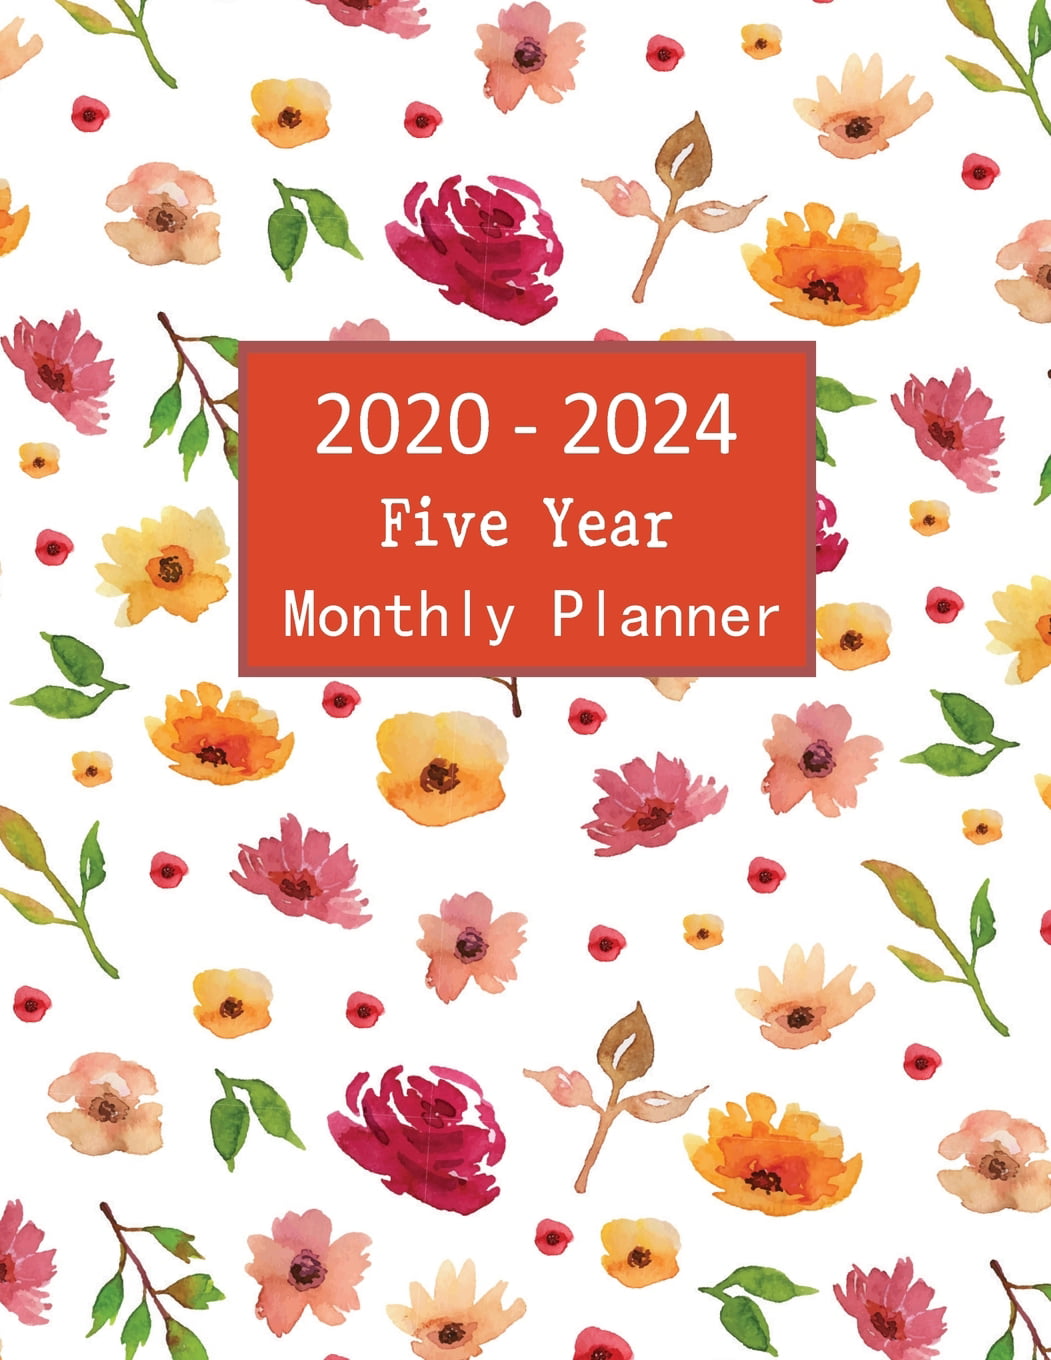 2020 - 2024 Five Year Monthly Planner: 2020-2024 Engagement Calendar